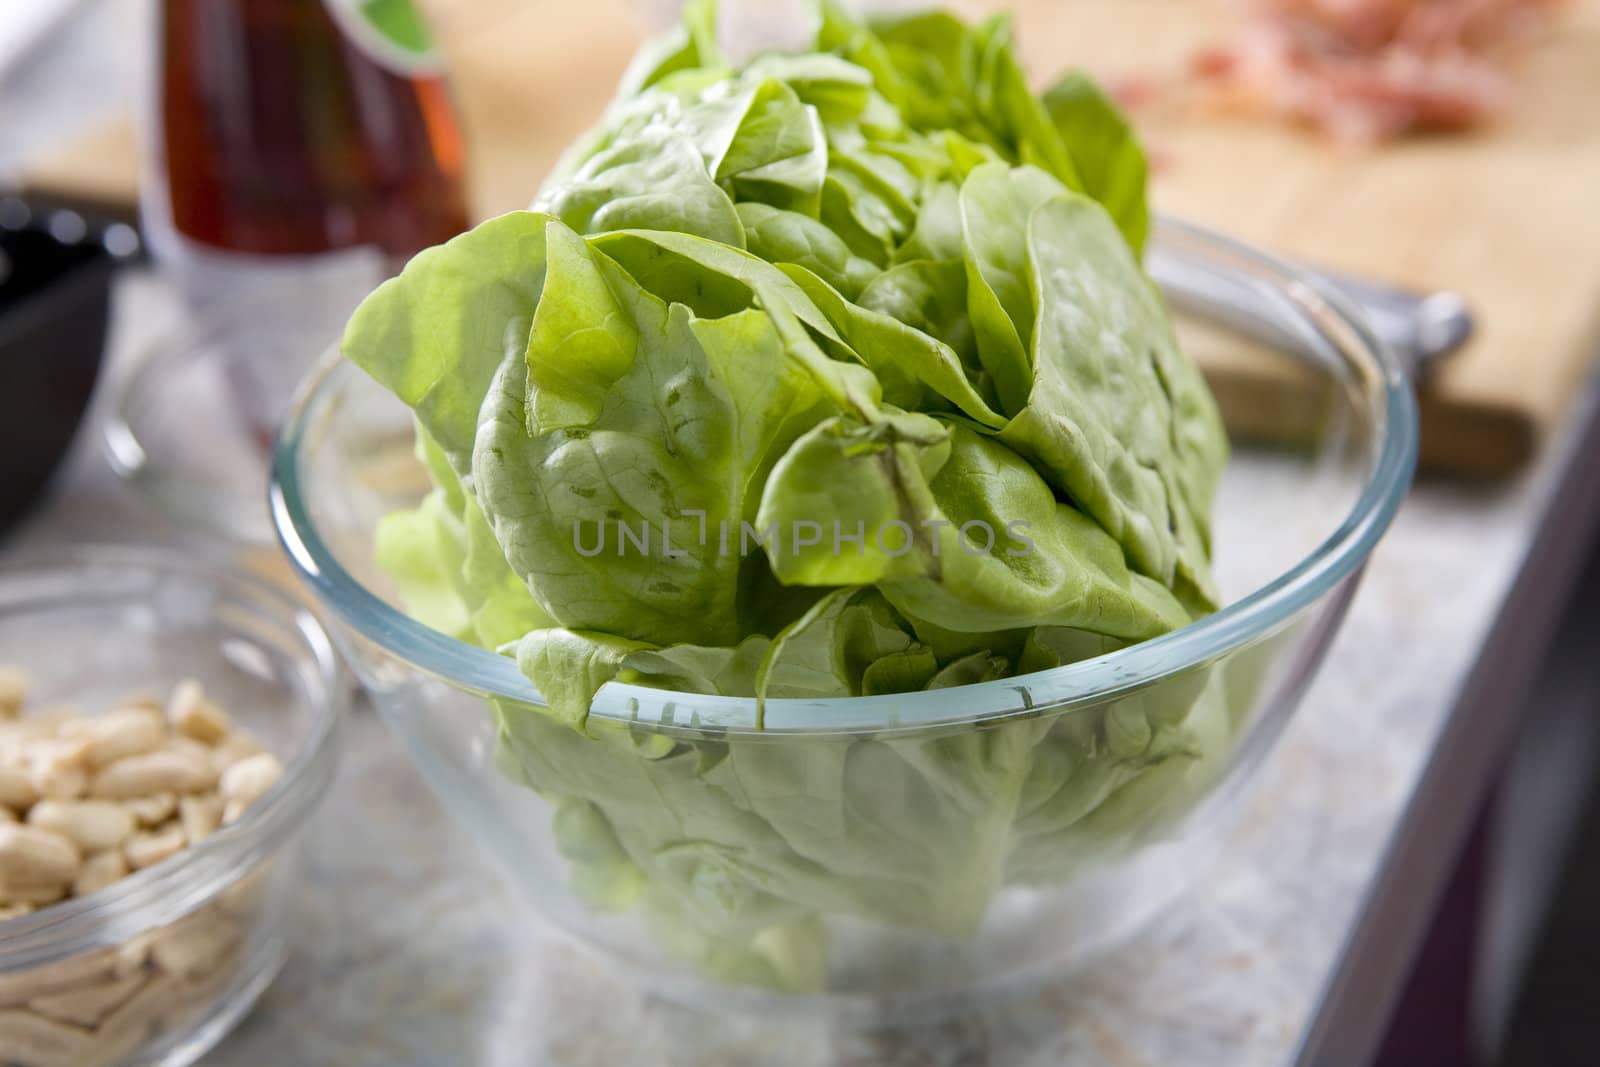 Green salad in a bowl on table before cooking